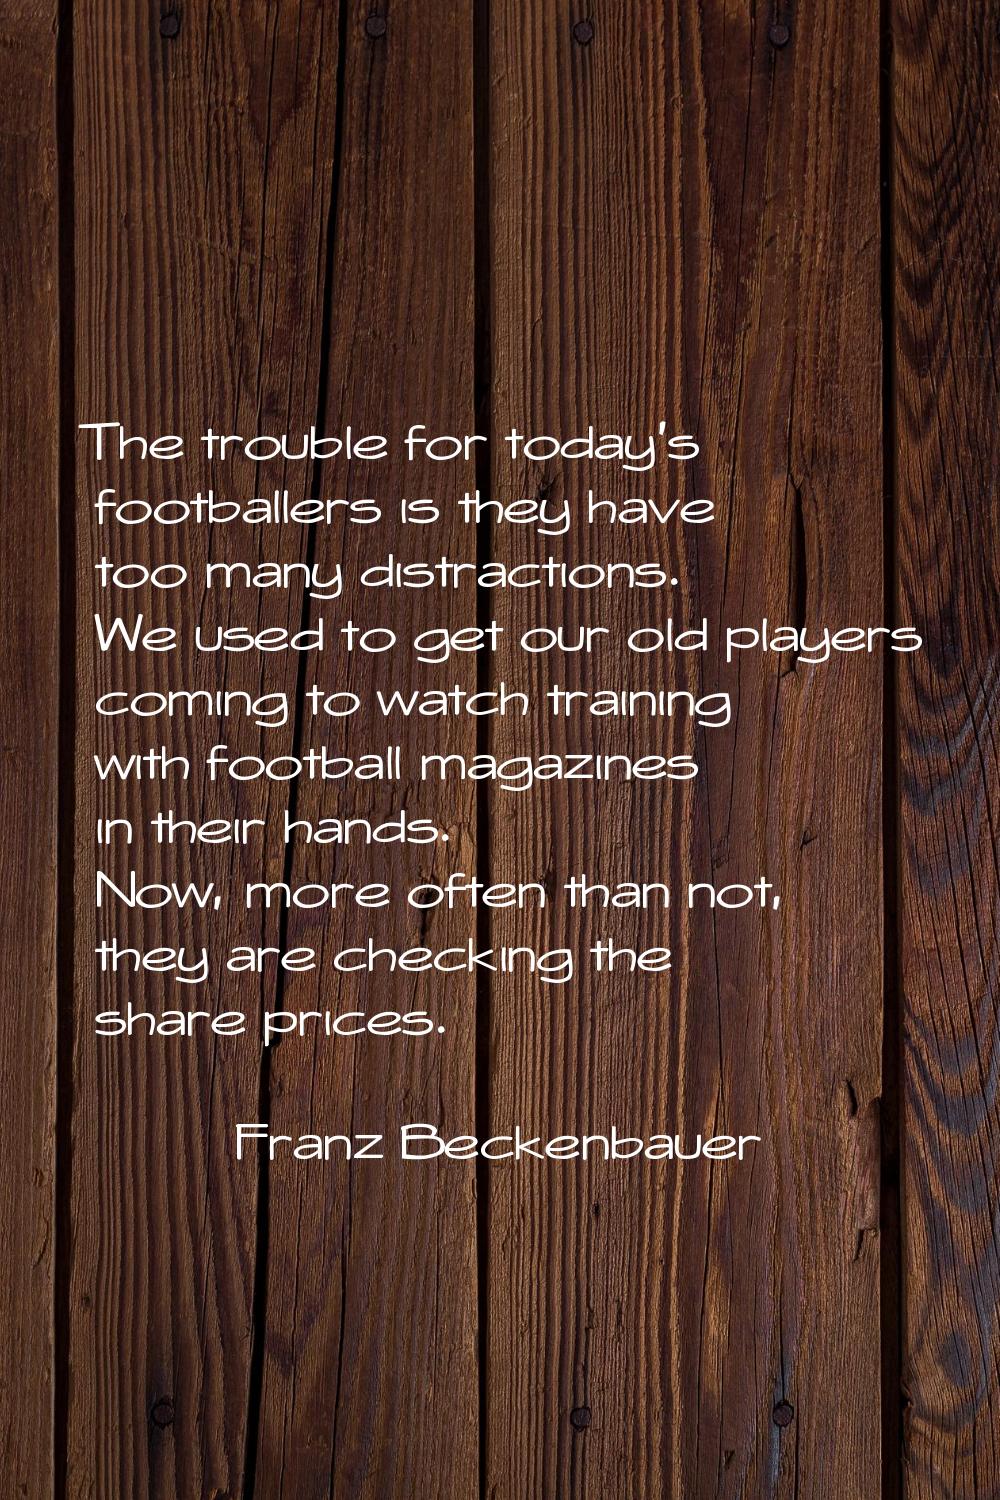 The trouble for today's footballers is they have too many distractions. We used to get our old play